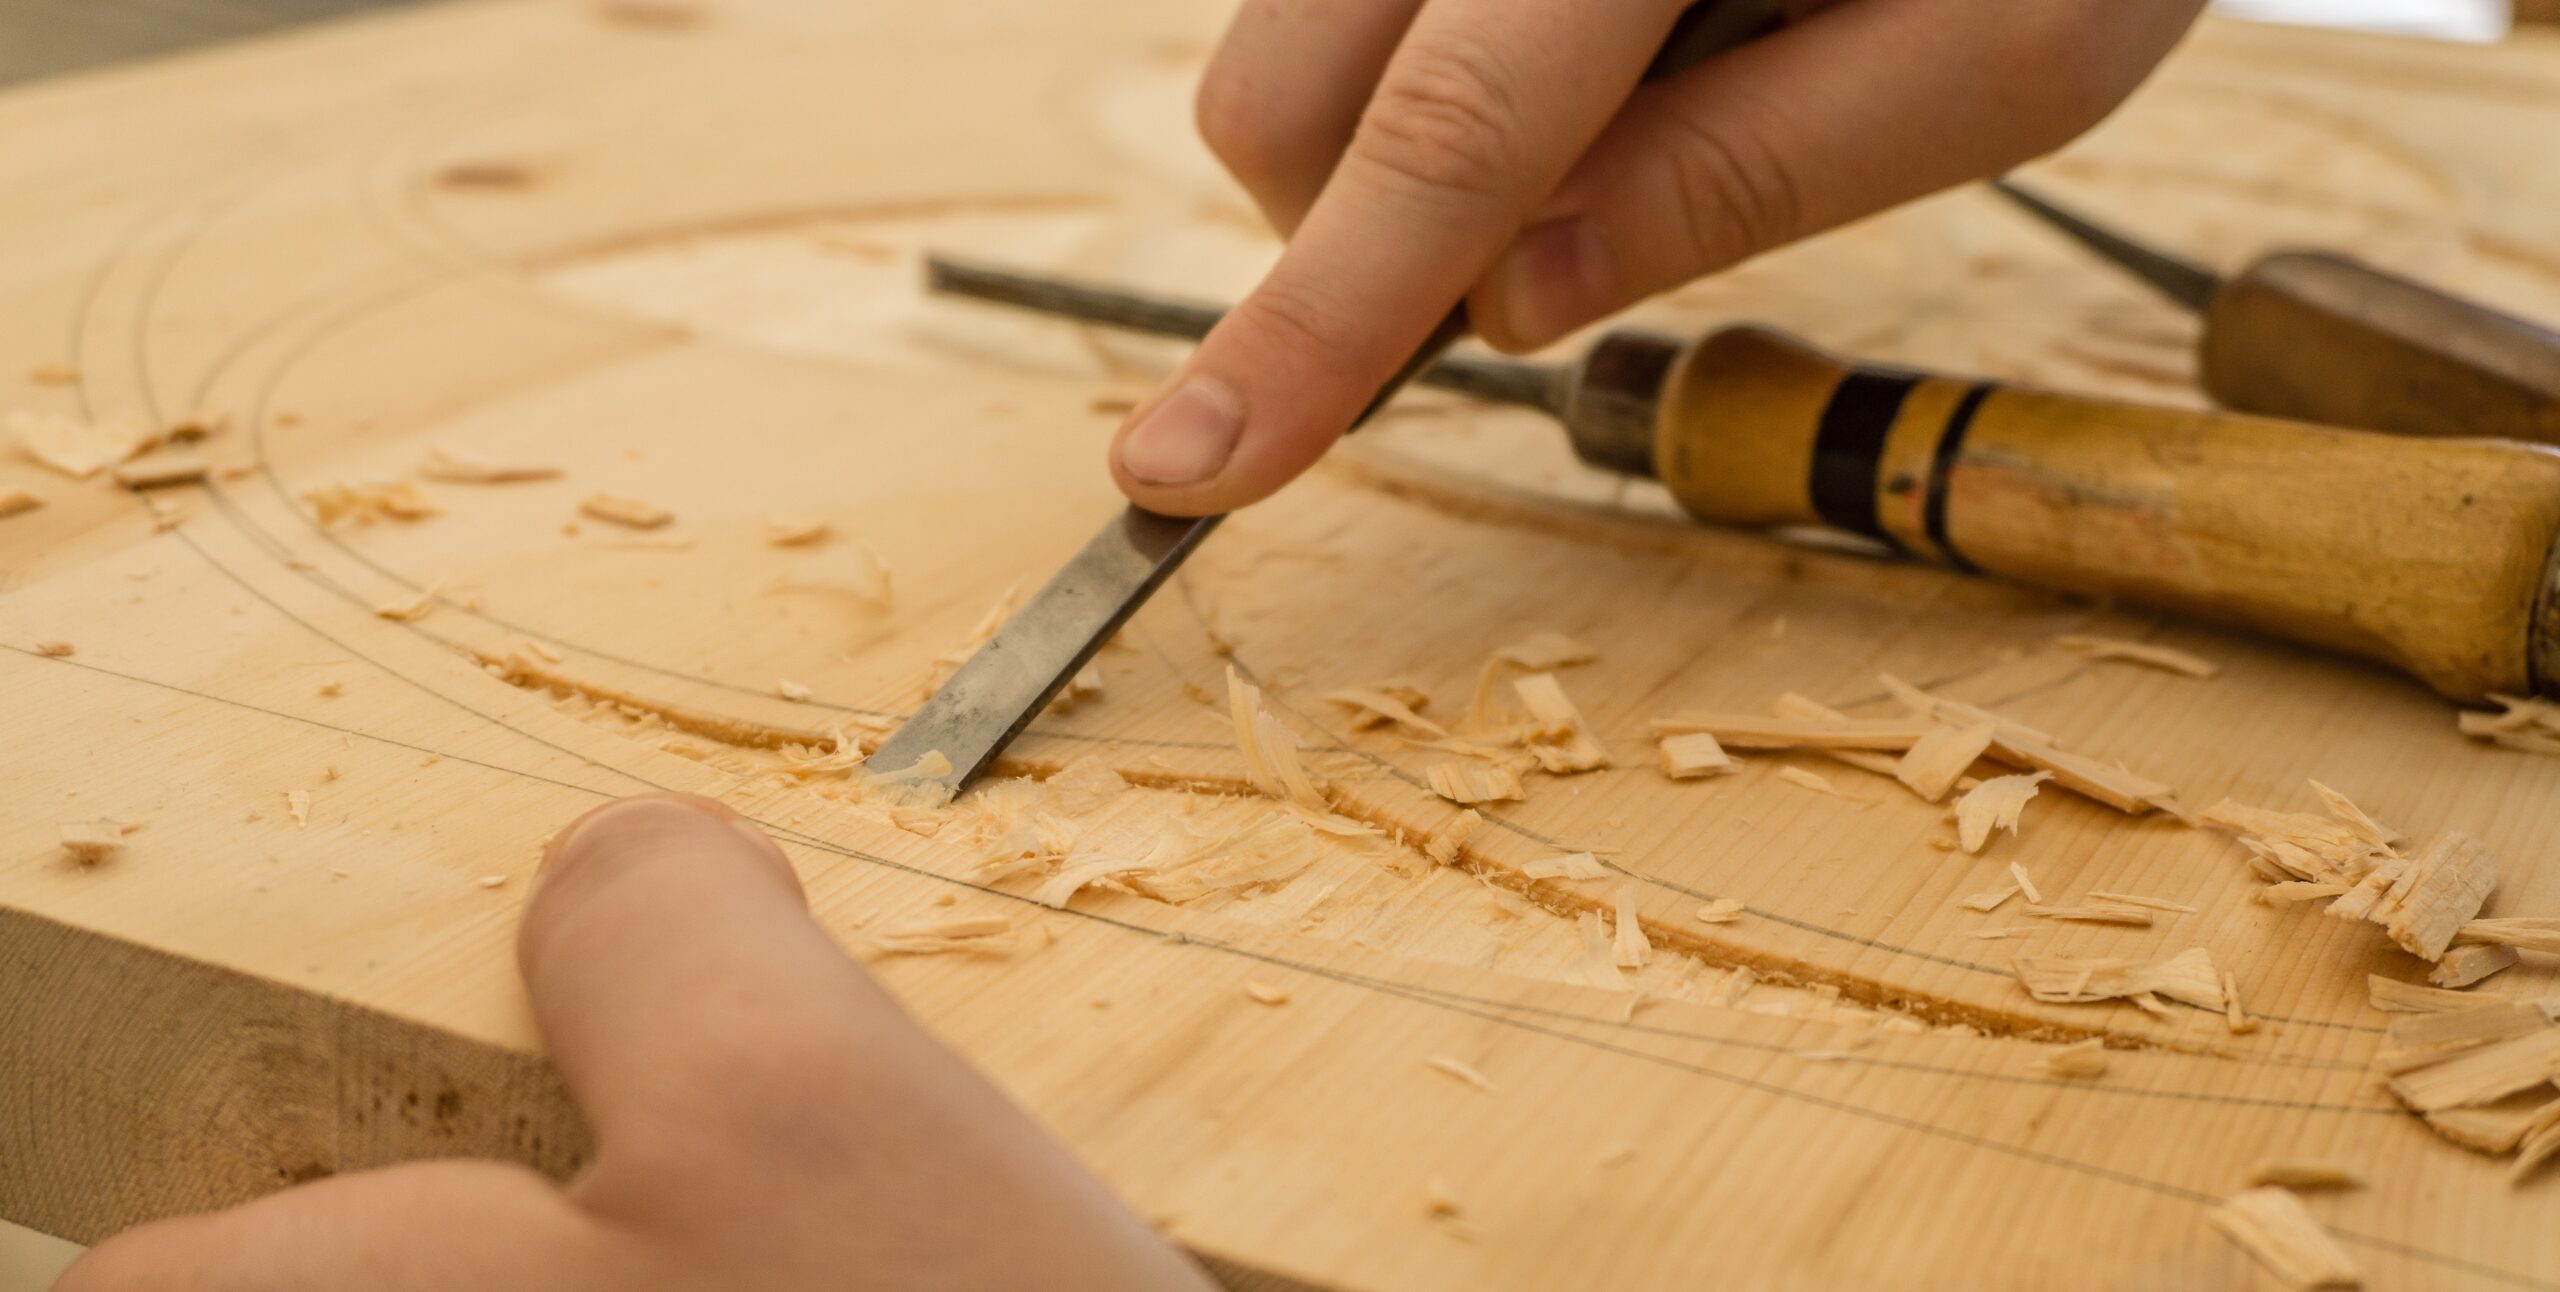 Hand on chisel, carving into wood